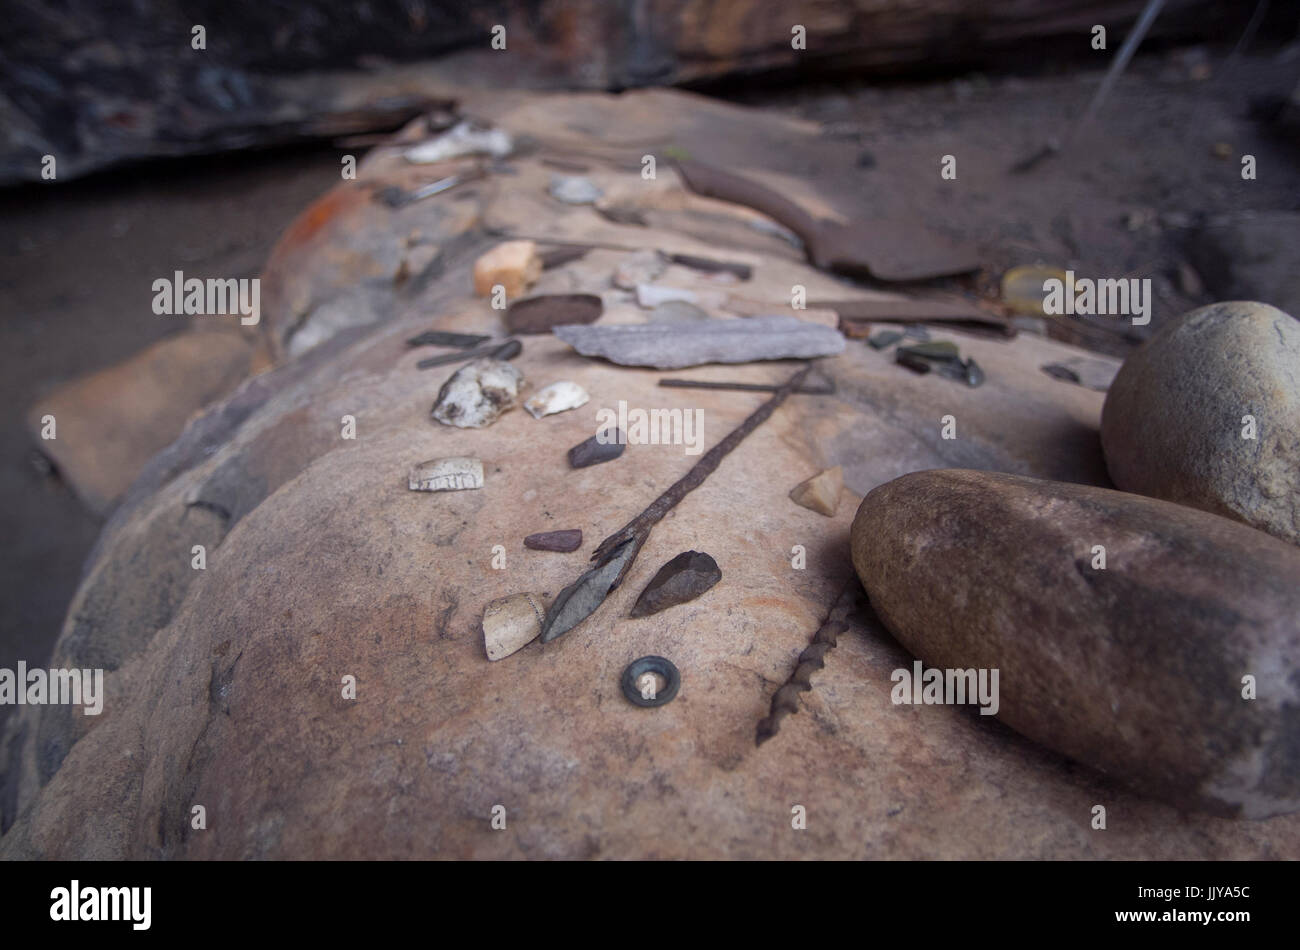 indigenous hunting tools and equipment found in a ancient cave Stock Photo